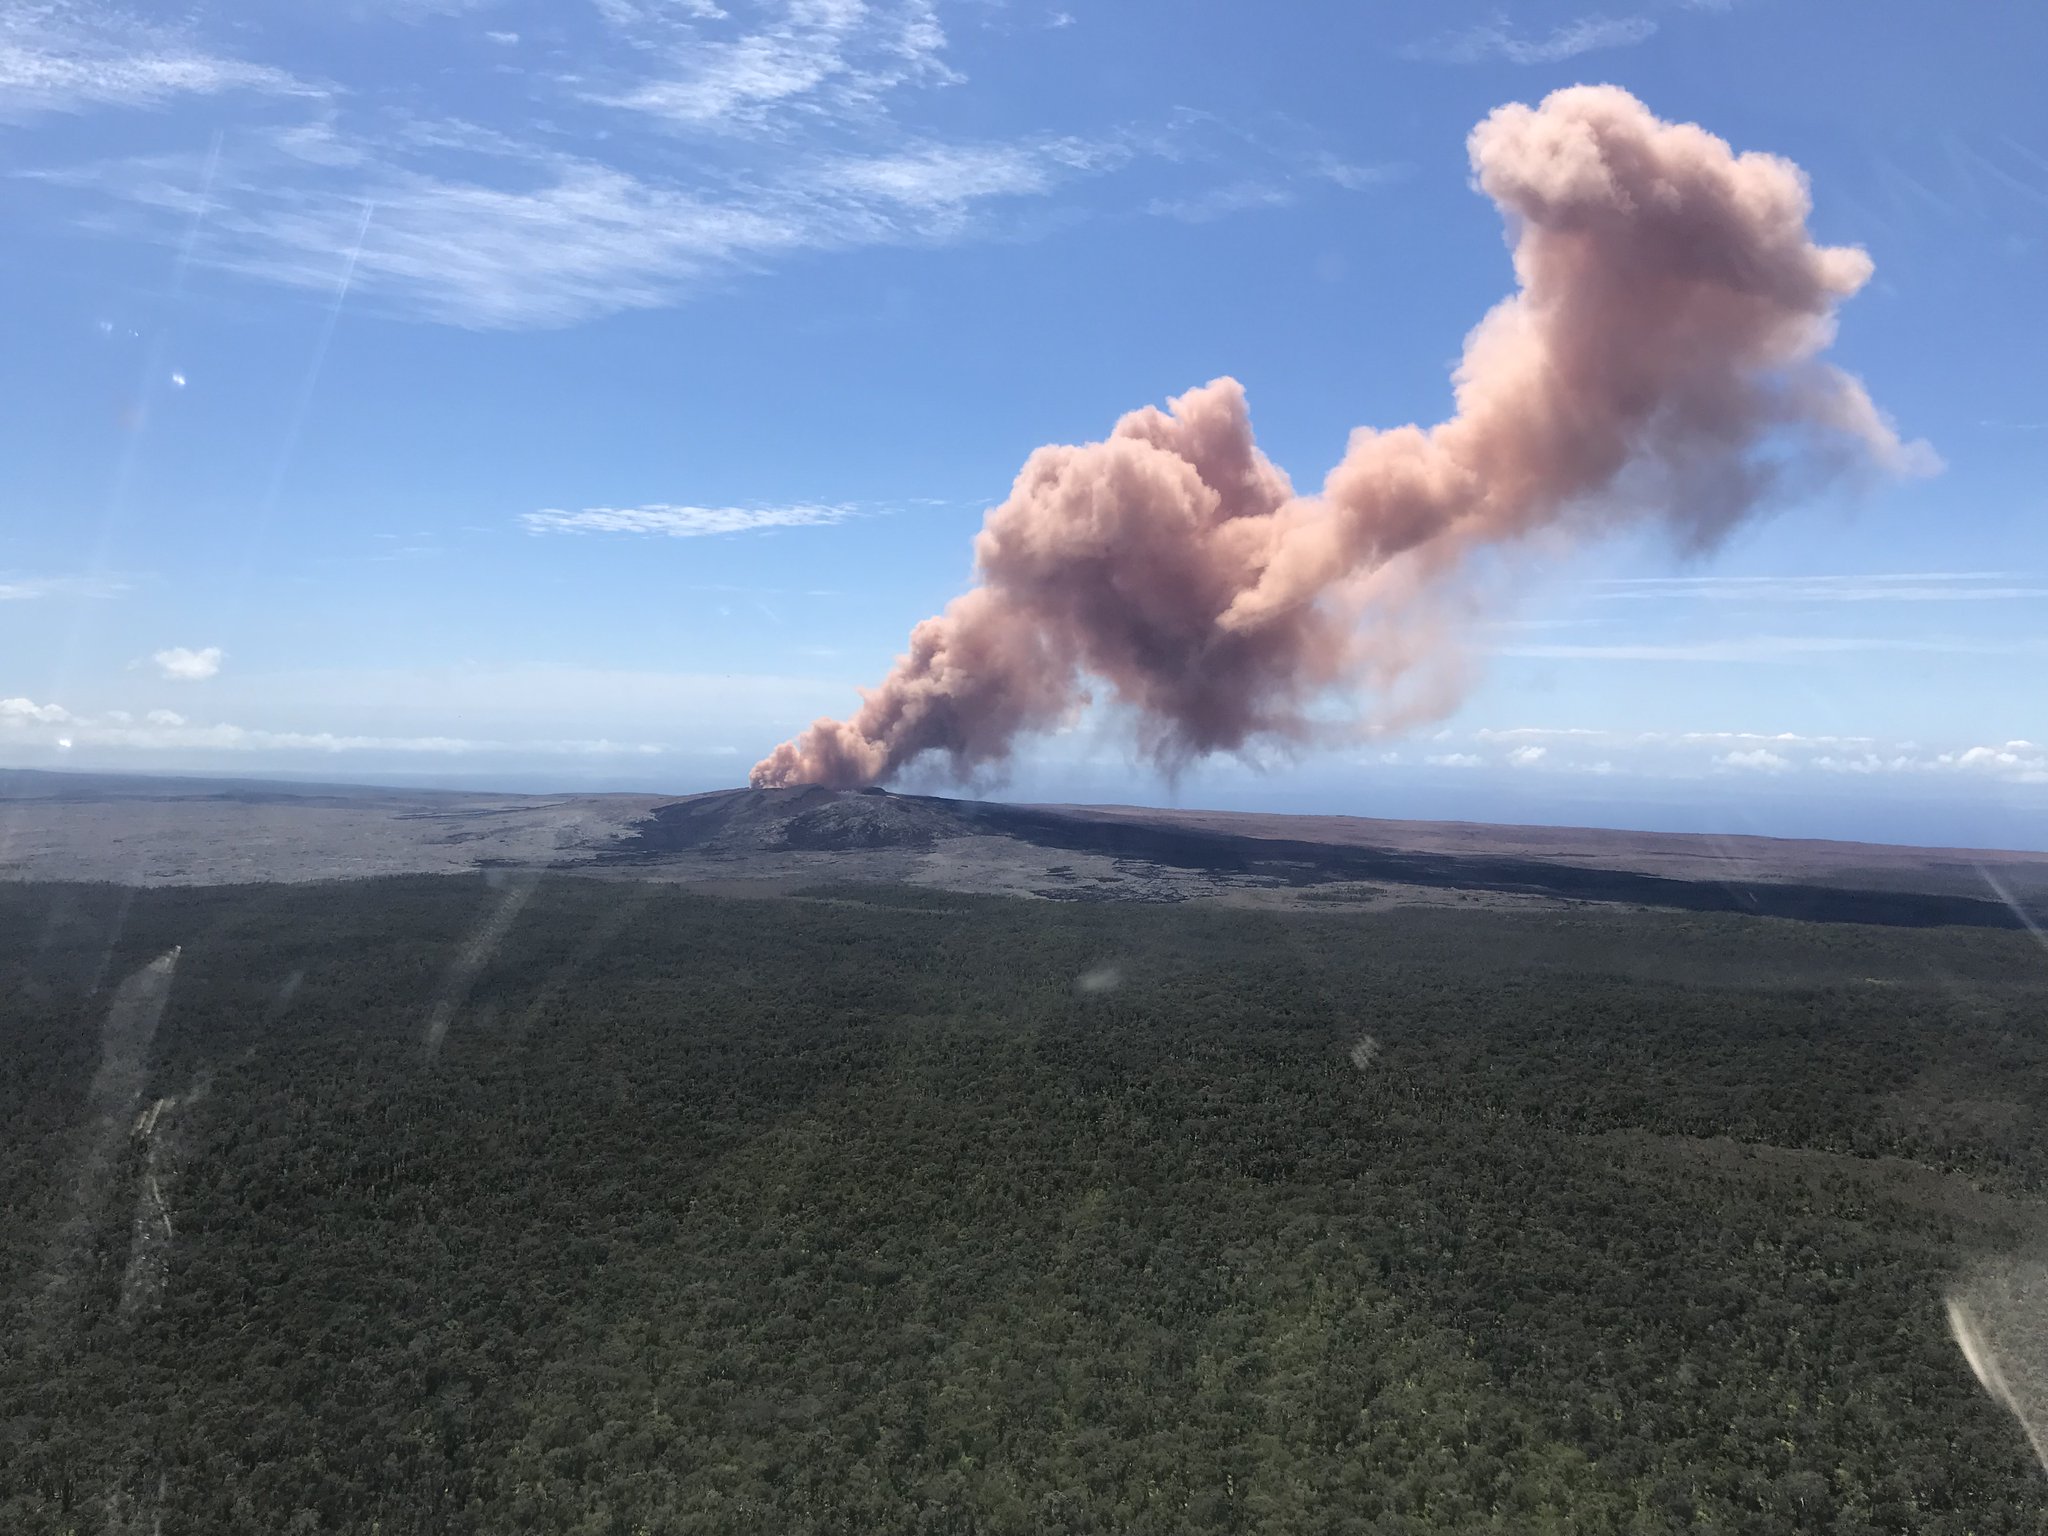 A plume of ash rises from Kilauea after a strong 5.0 quake struck the area this morning. Image: USGS photo by Kevan Kamibayashi.